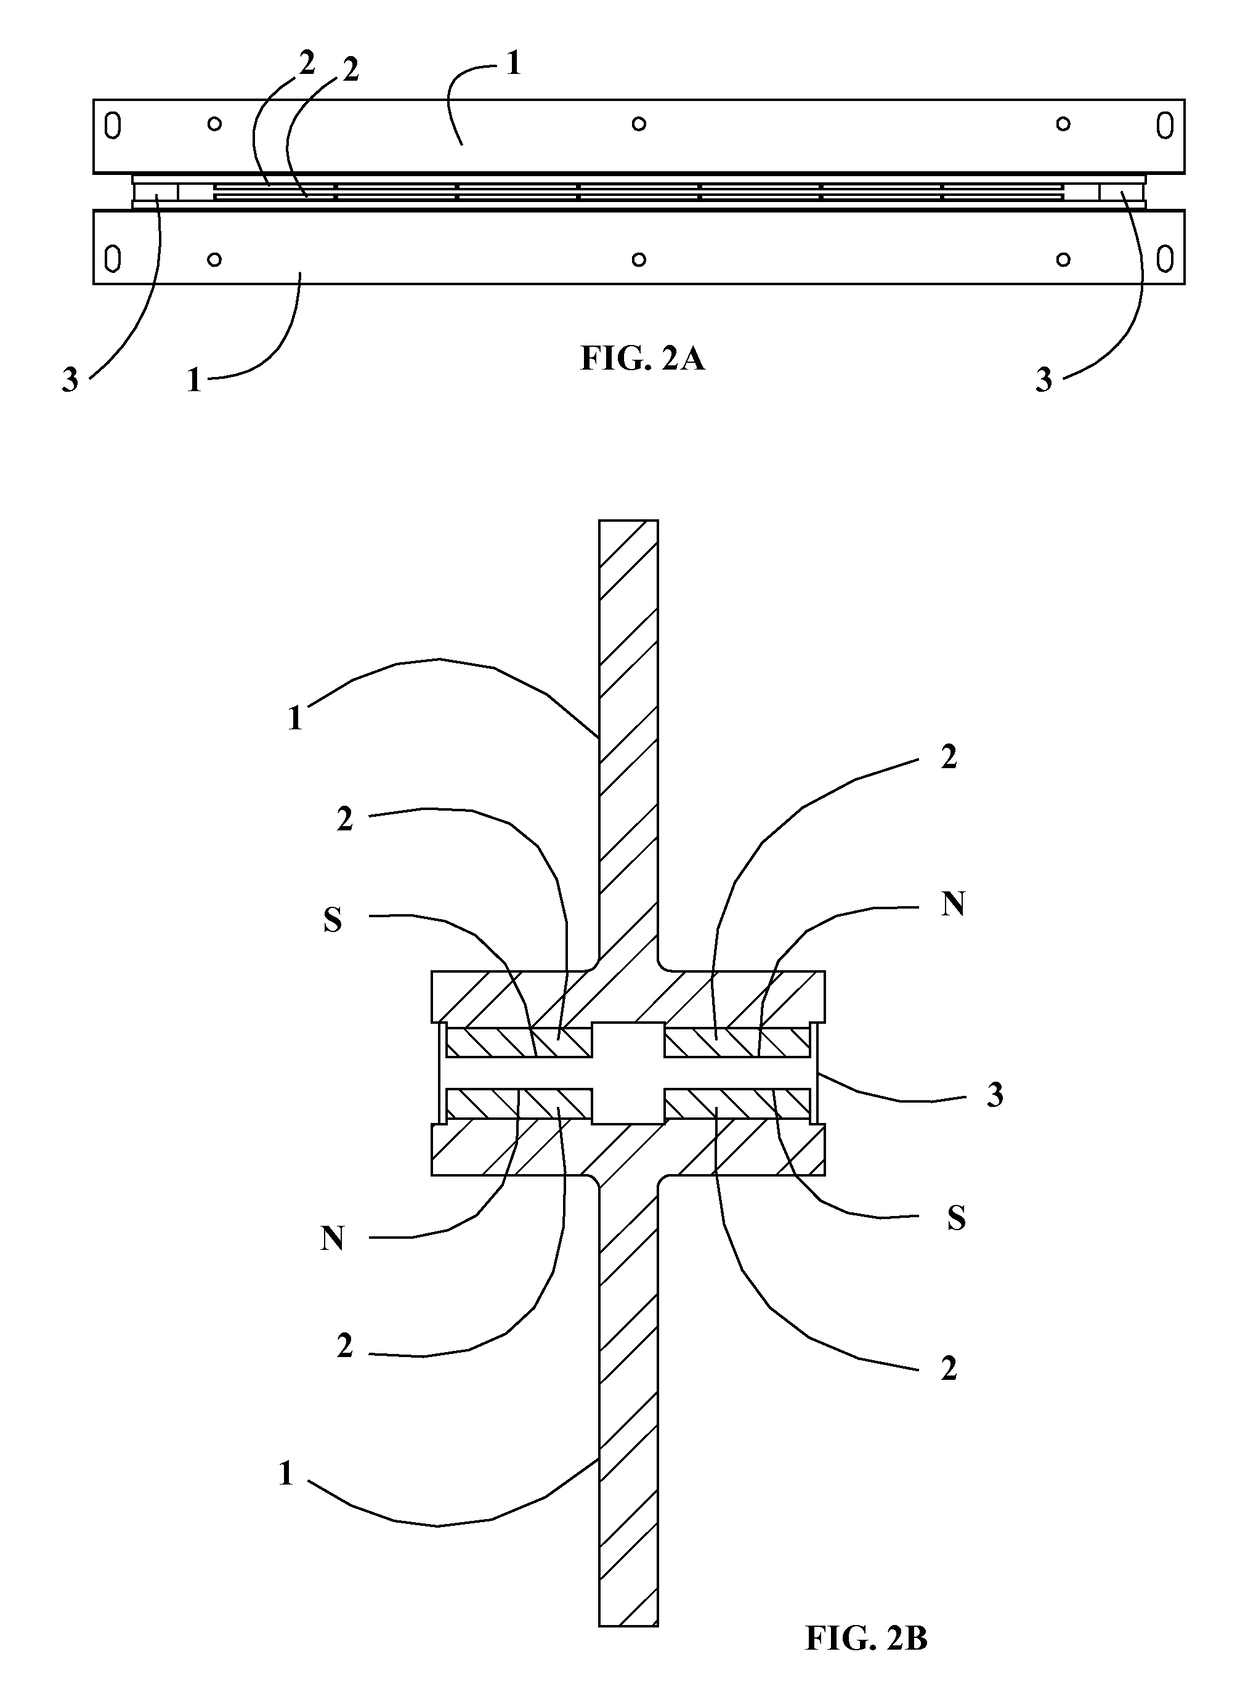 Moving coil module comprising a substrate patterned with a conductor trace